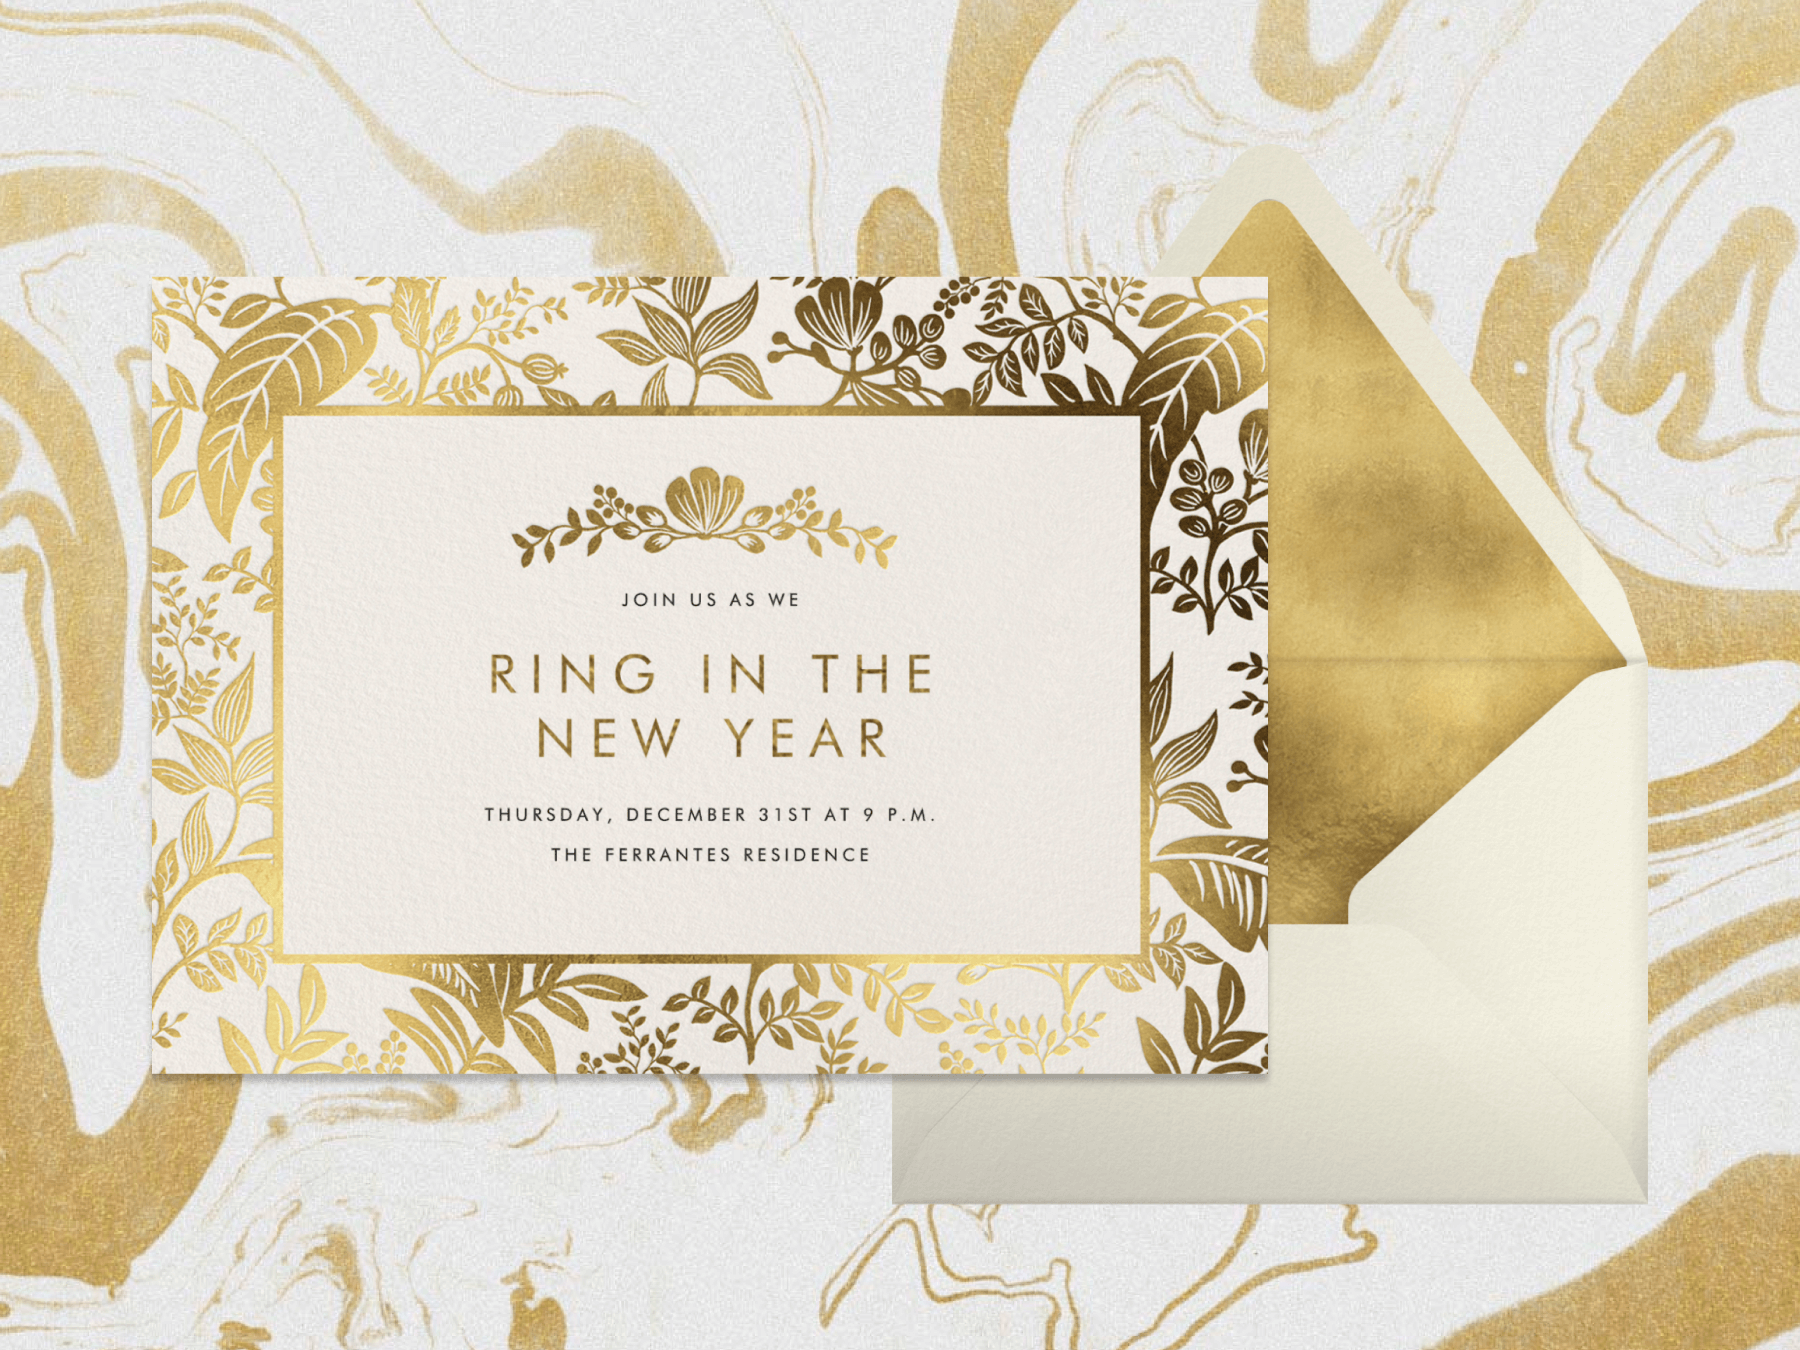 A New Year’s Eve party invitation with an intricate border of leaves in metallic gold.